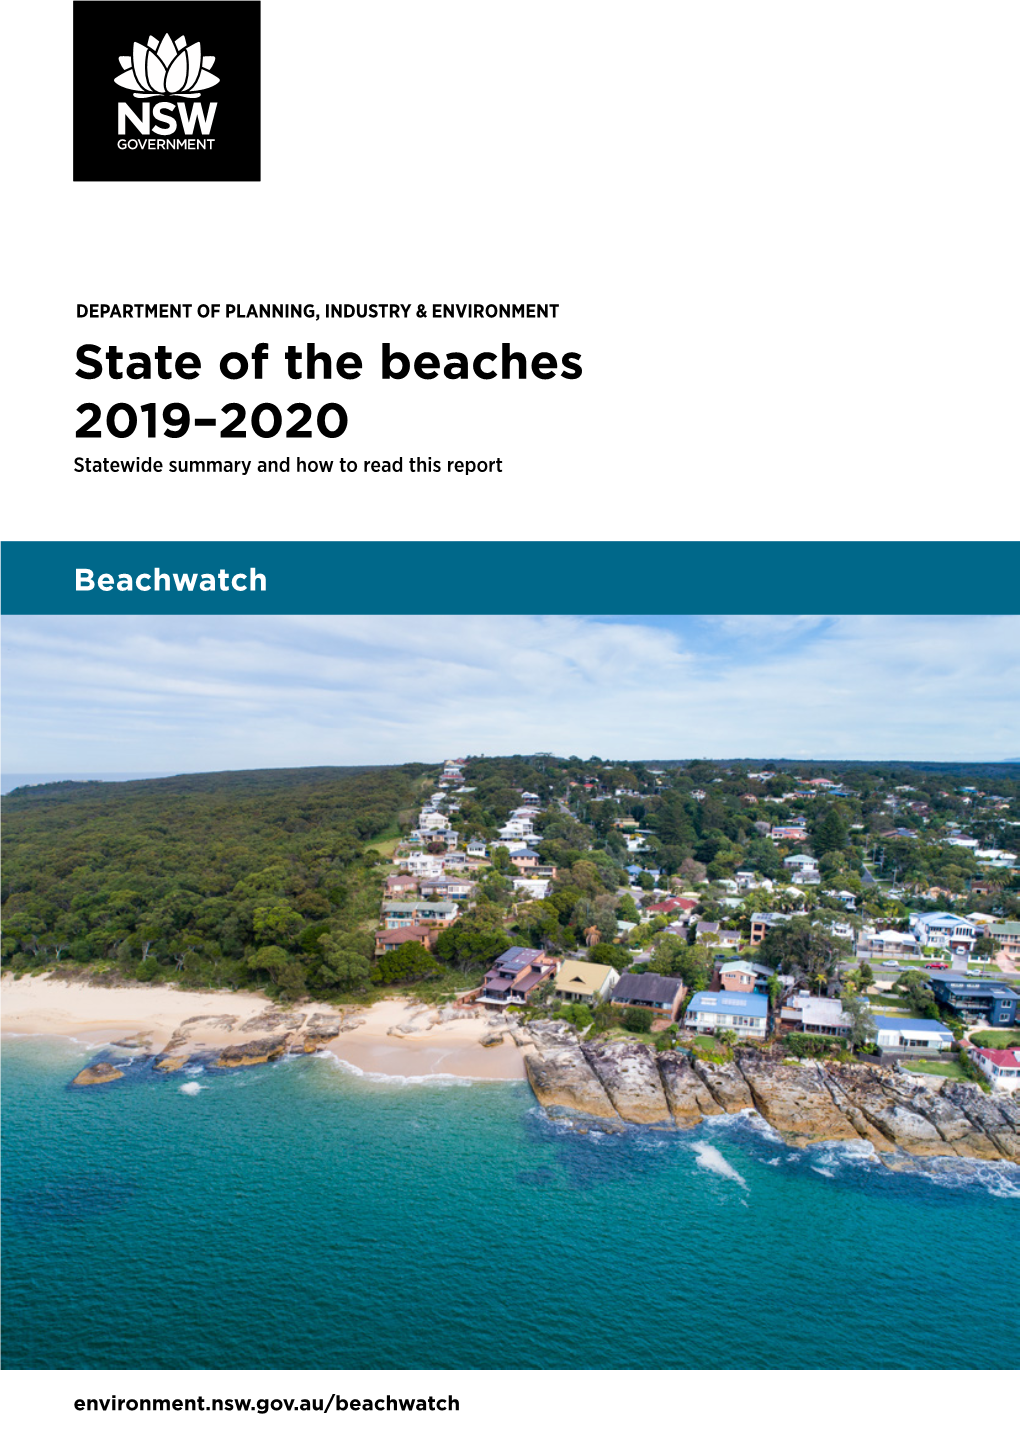 State of the Beaches 2019–2020 Statewide Summary and How to Read This Report